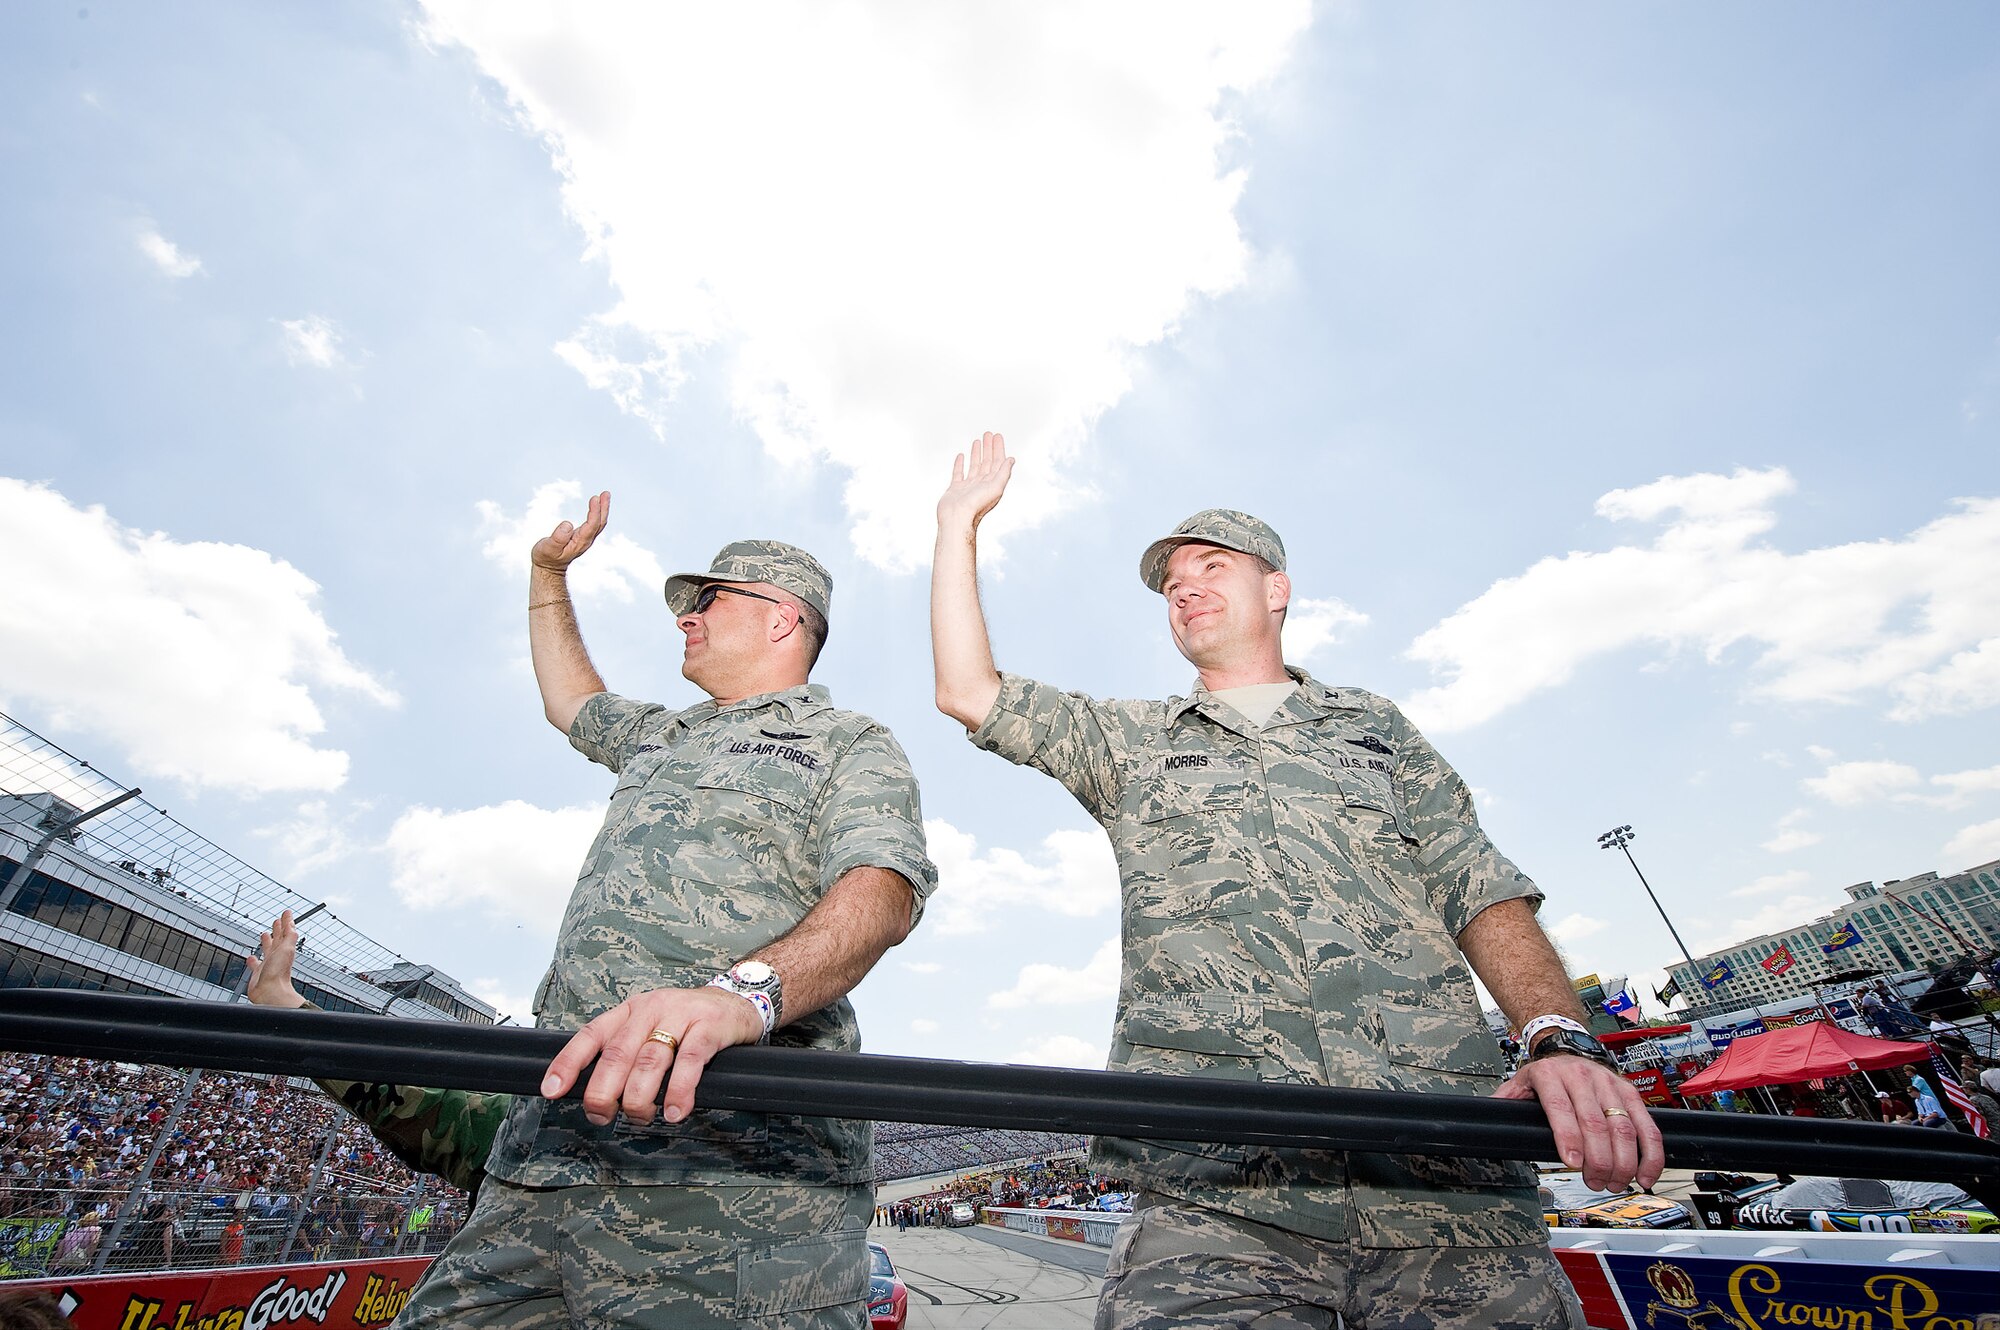 Cols. Randal L. Bright (left) and Manson O. Morris, the two wing commanders from Dover Air Force Base, Del., wave to NASCAR spectators during a pre-race parade lap at the Dover International Speedway May 31. Colonel Bright commands the Reserve associate unit and Colonel Morris leads the regular Air Force unit, both of which support the C-5 and C-17 airlift mission. (U.S. Air Force photo/Roland Balik)